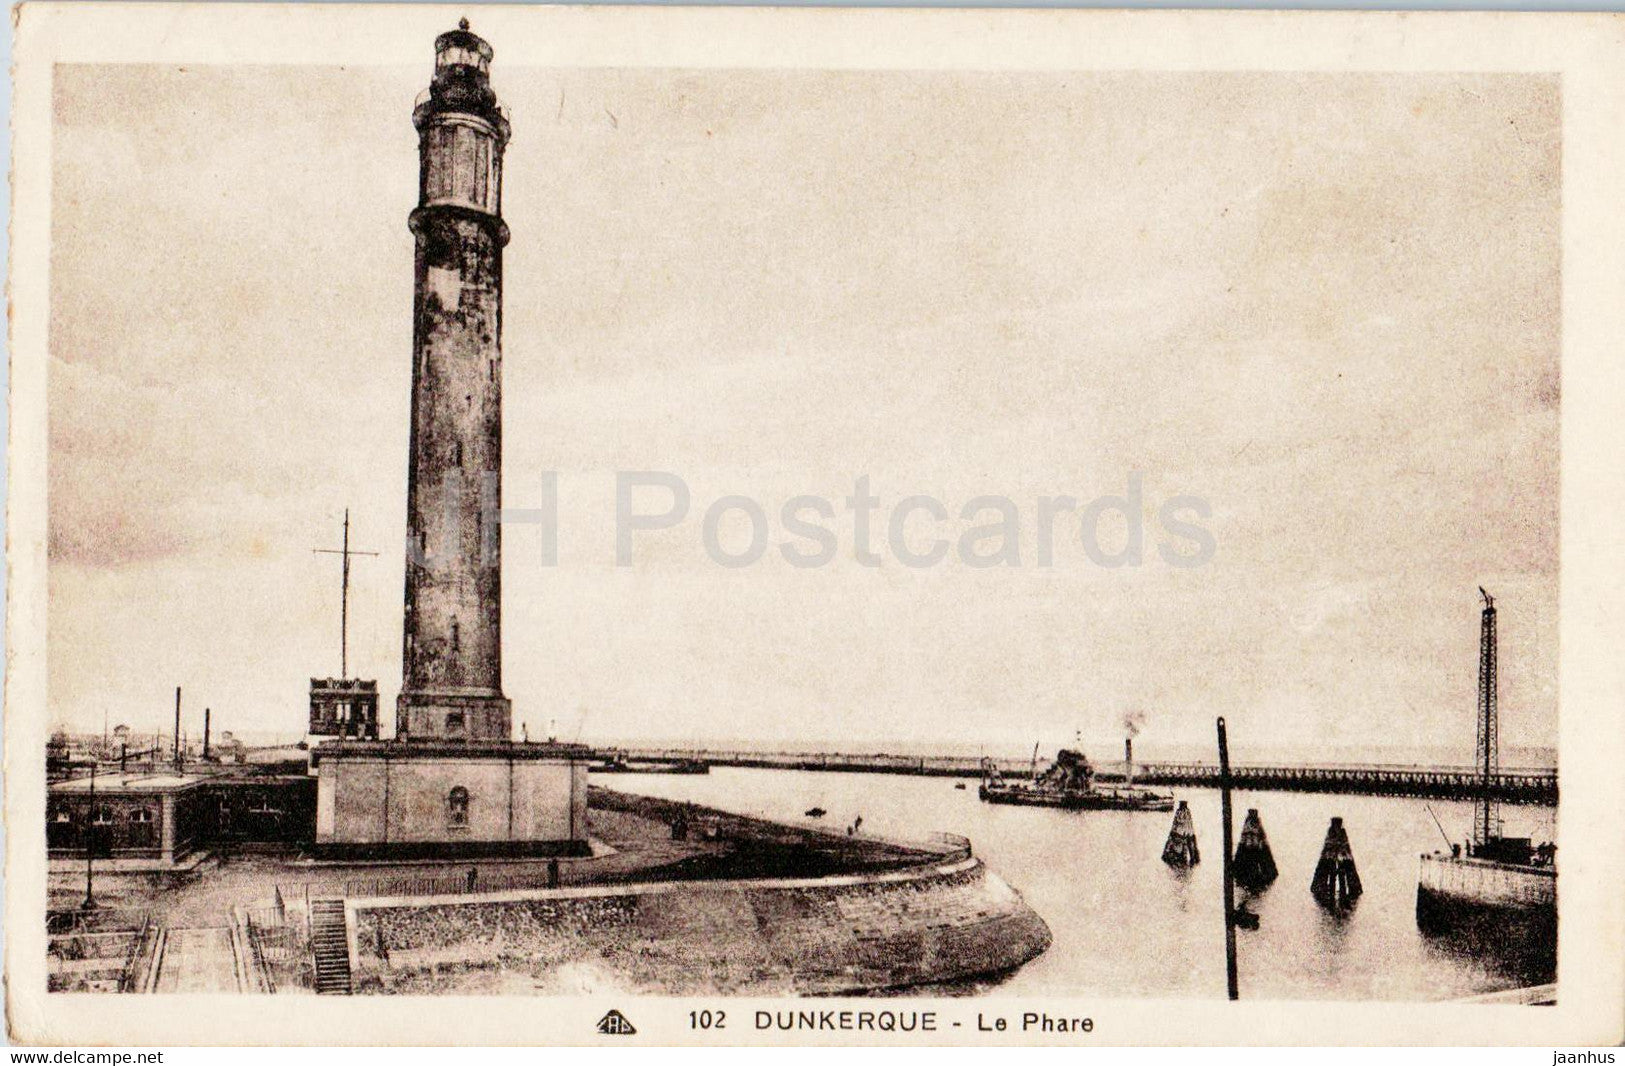 Dunkerque - Le Phare - lighthouse - 102 - old postcard - France - unused - JH Postcards